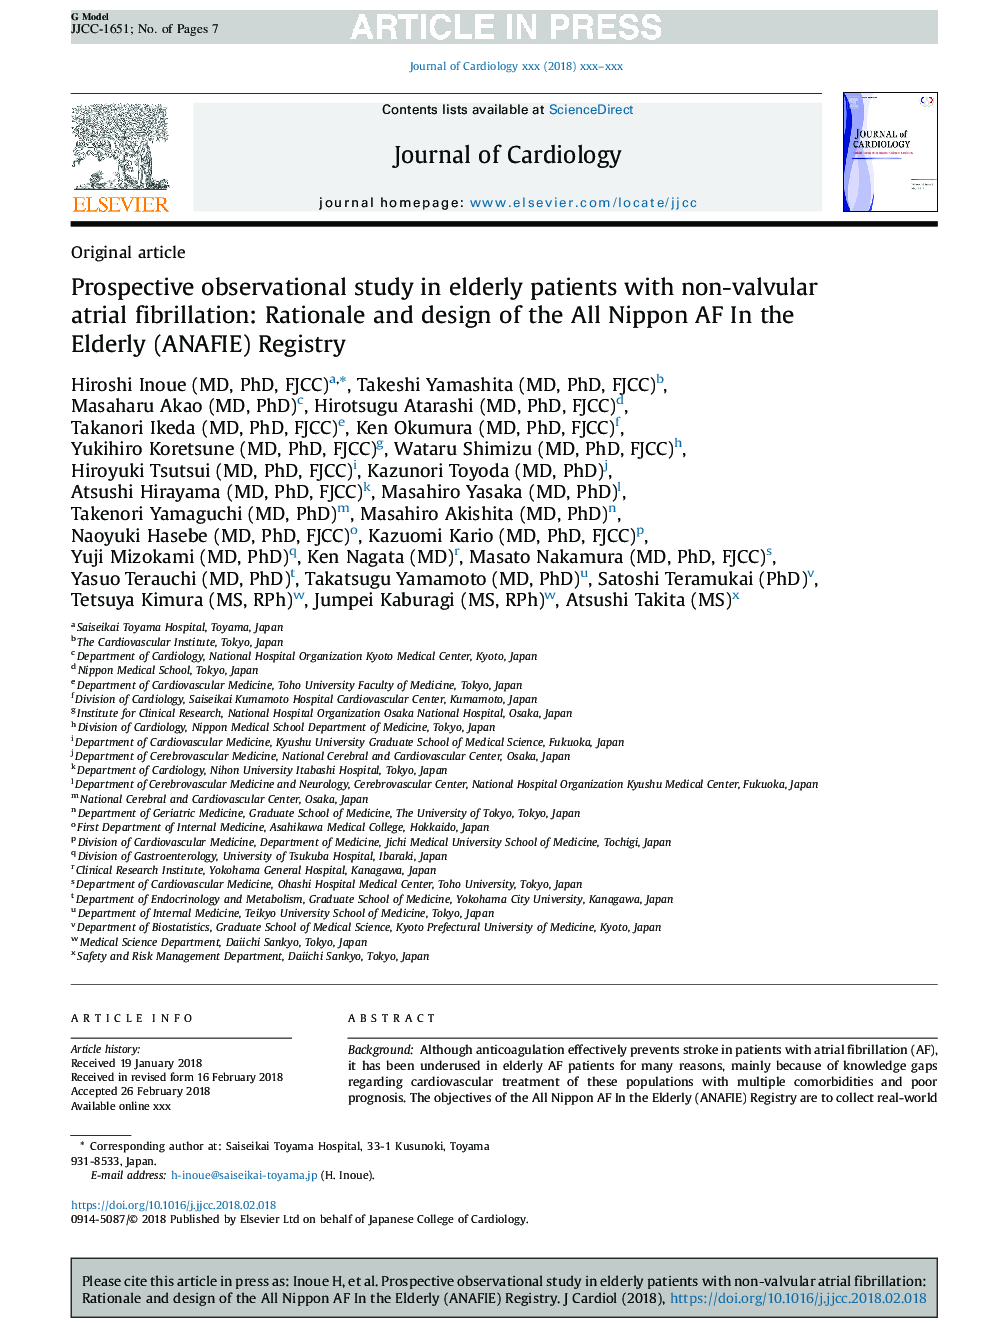 Prospective observational study in elderly patients with non-valvular atrial fibrillation: Rationale and design of the All Nippon AF In the Elderly (ANAFIE) Registry